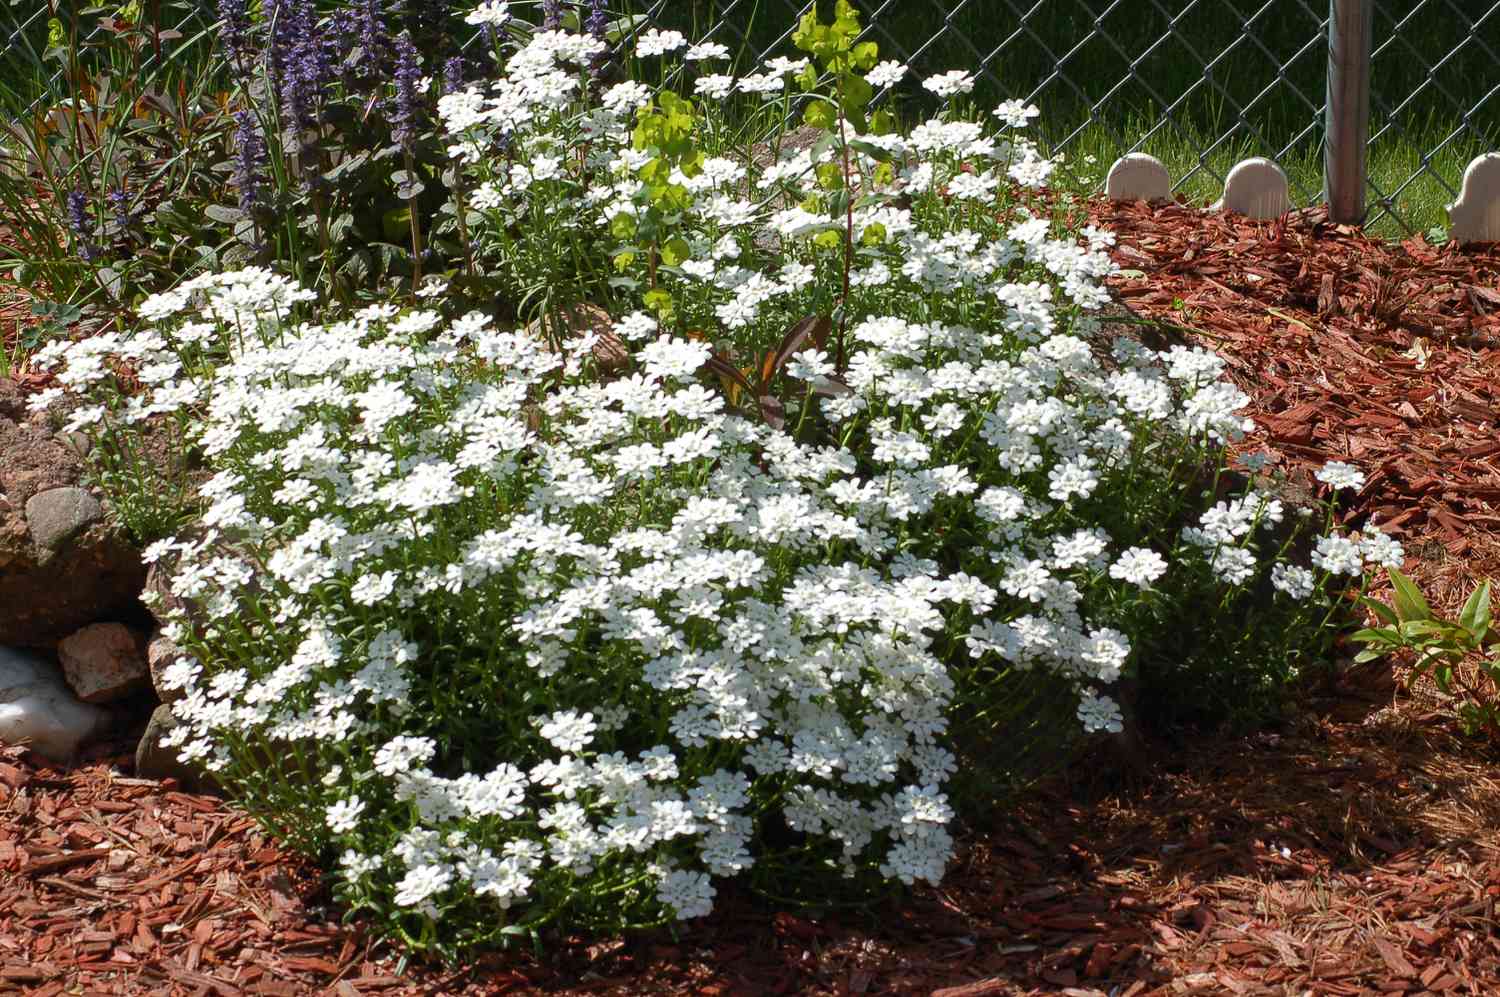 Candytufts